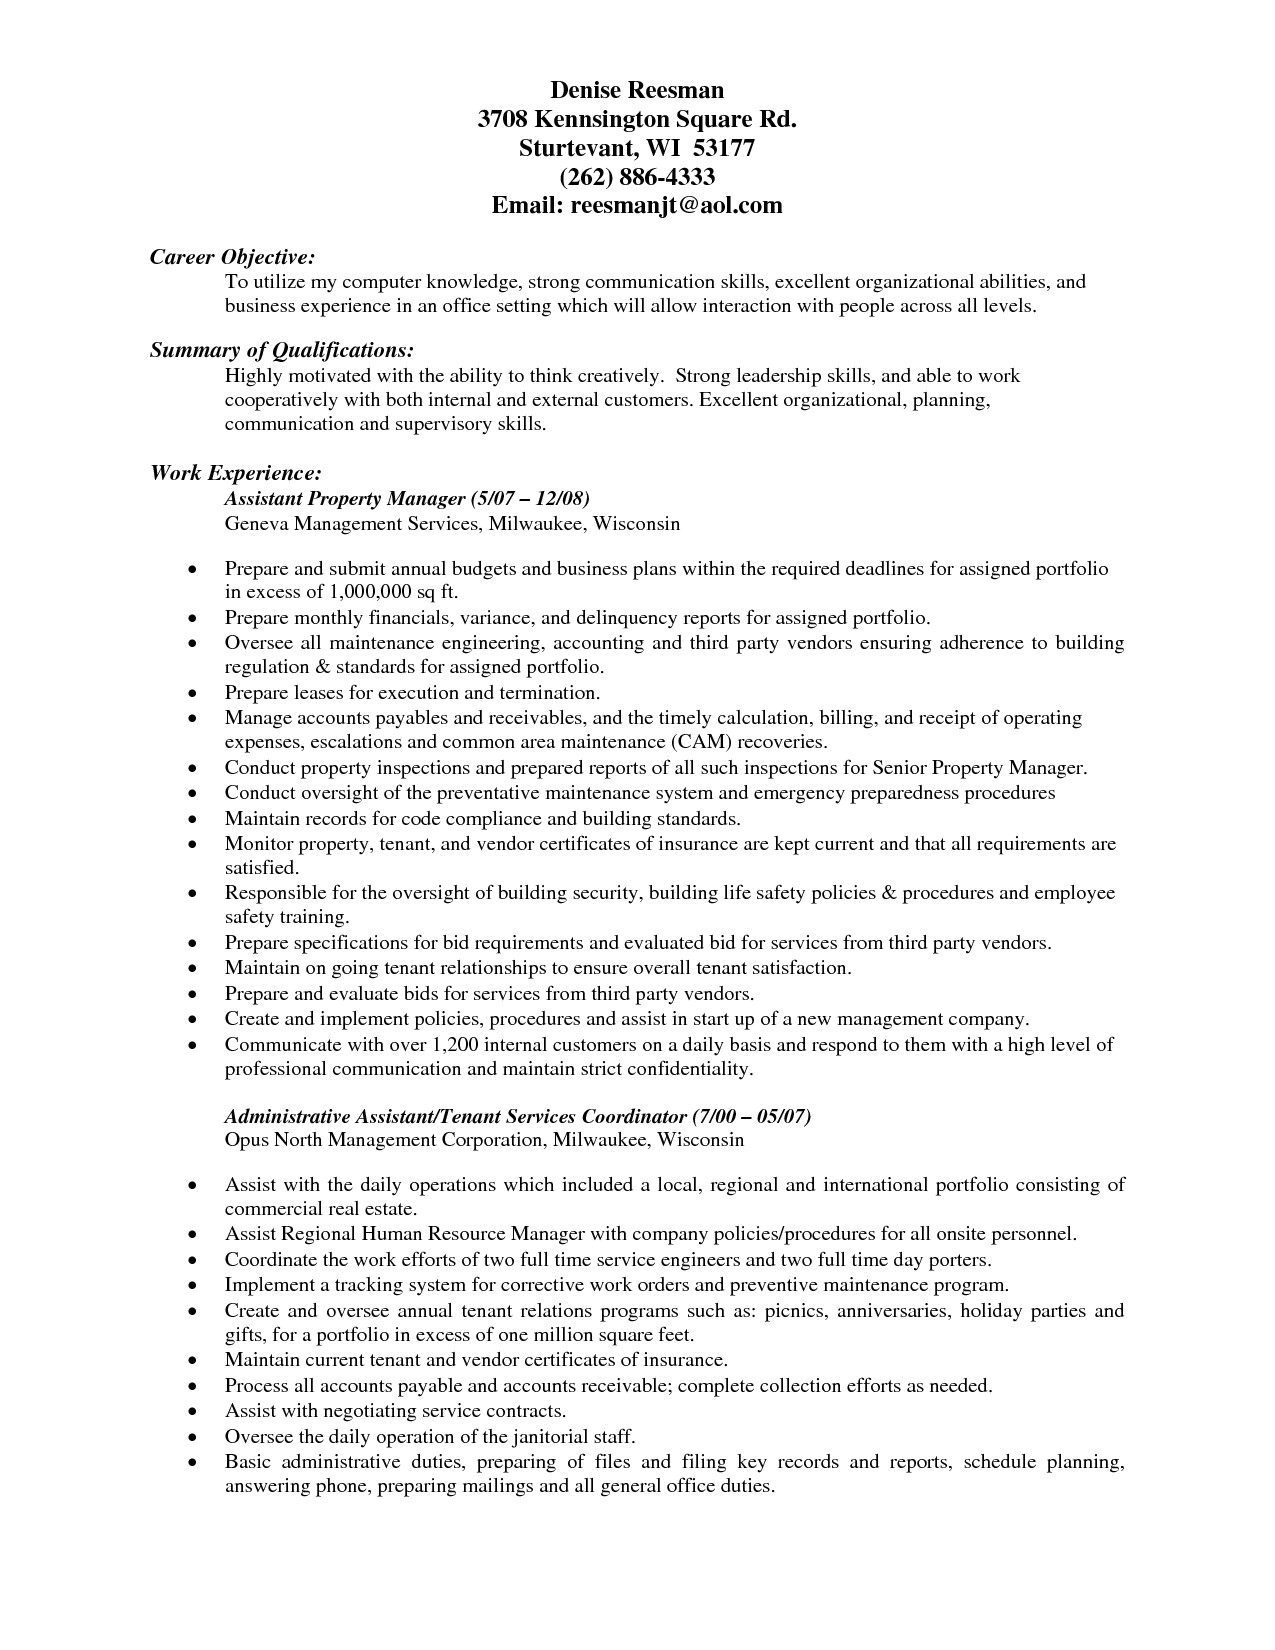 assistant property manager resume template